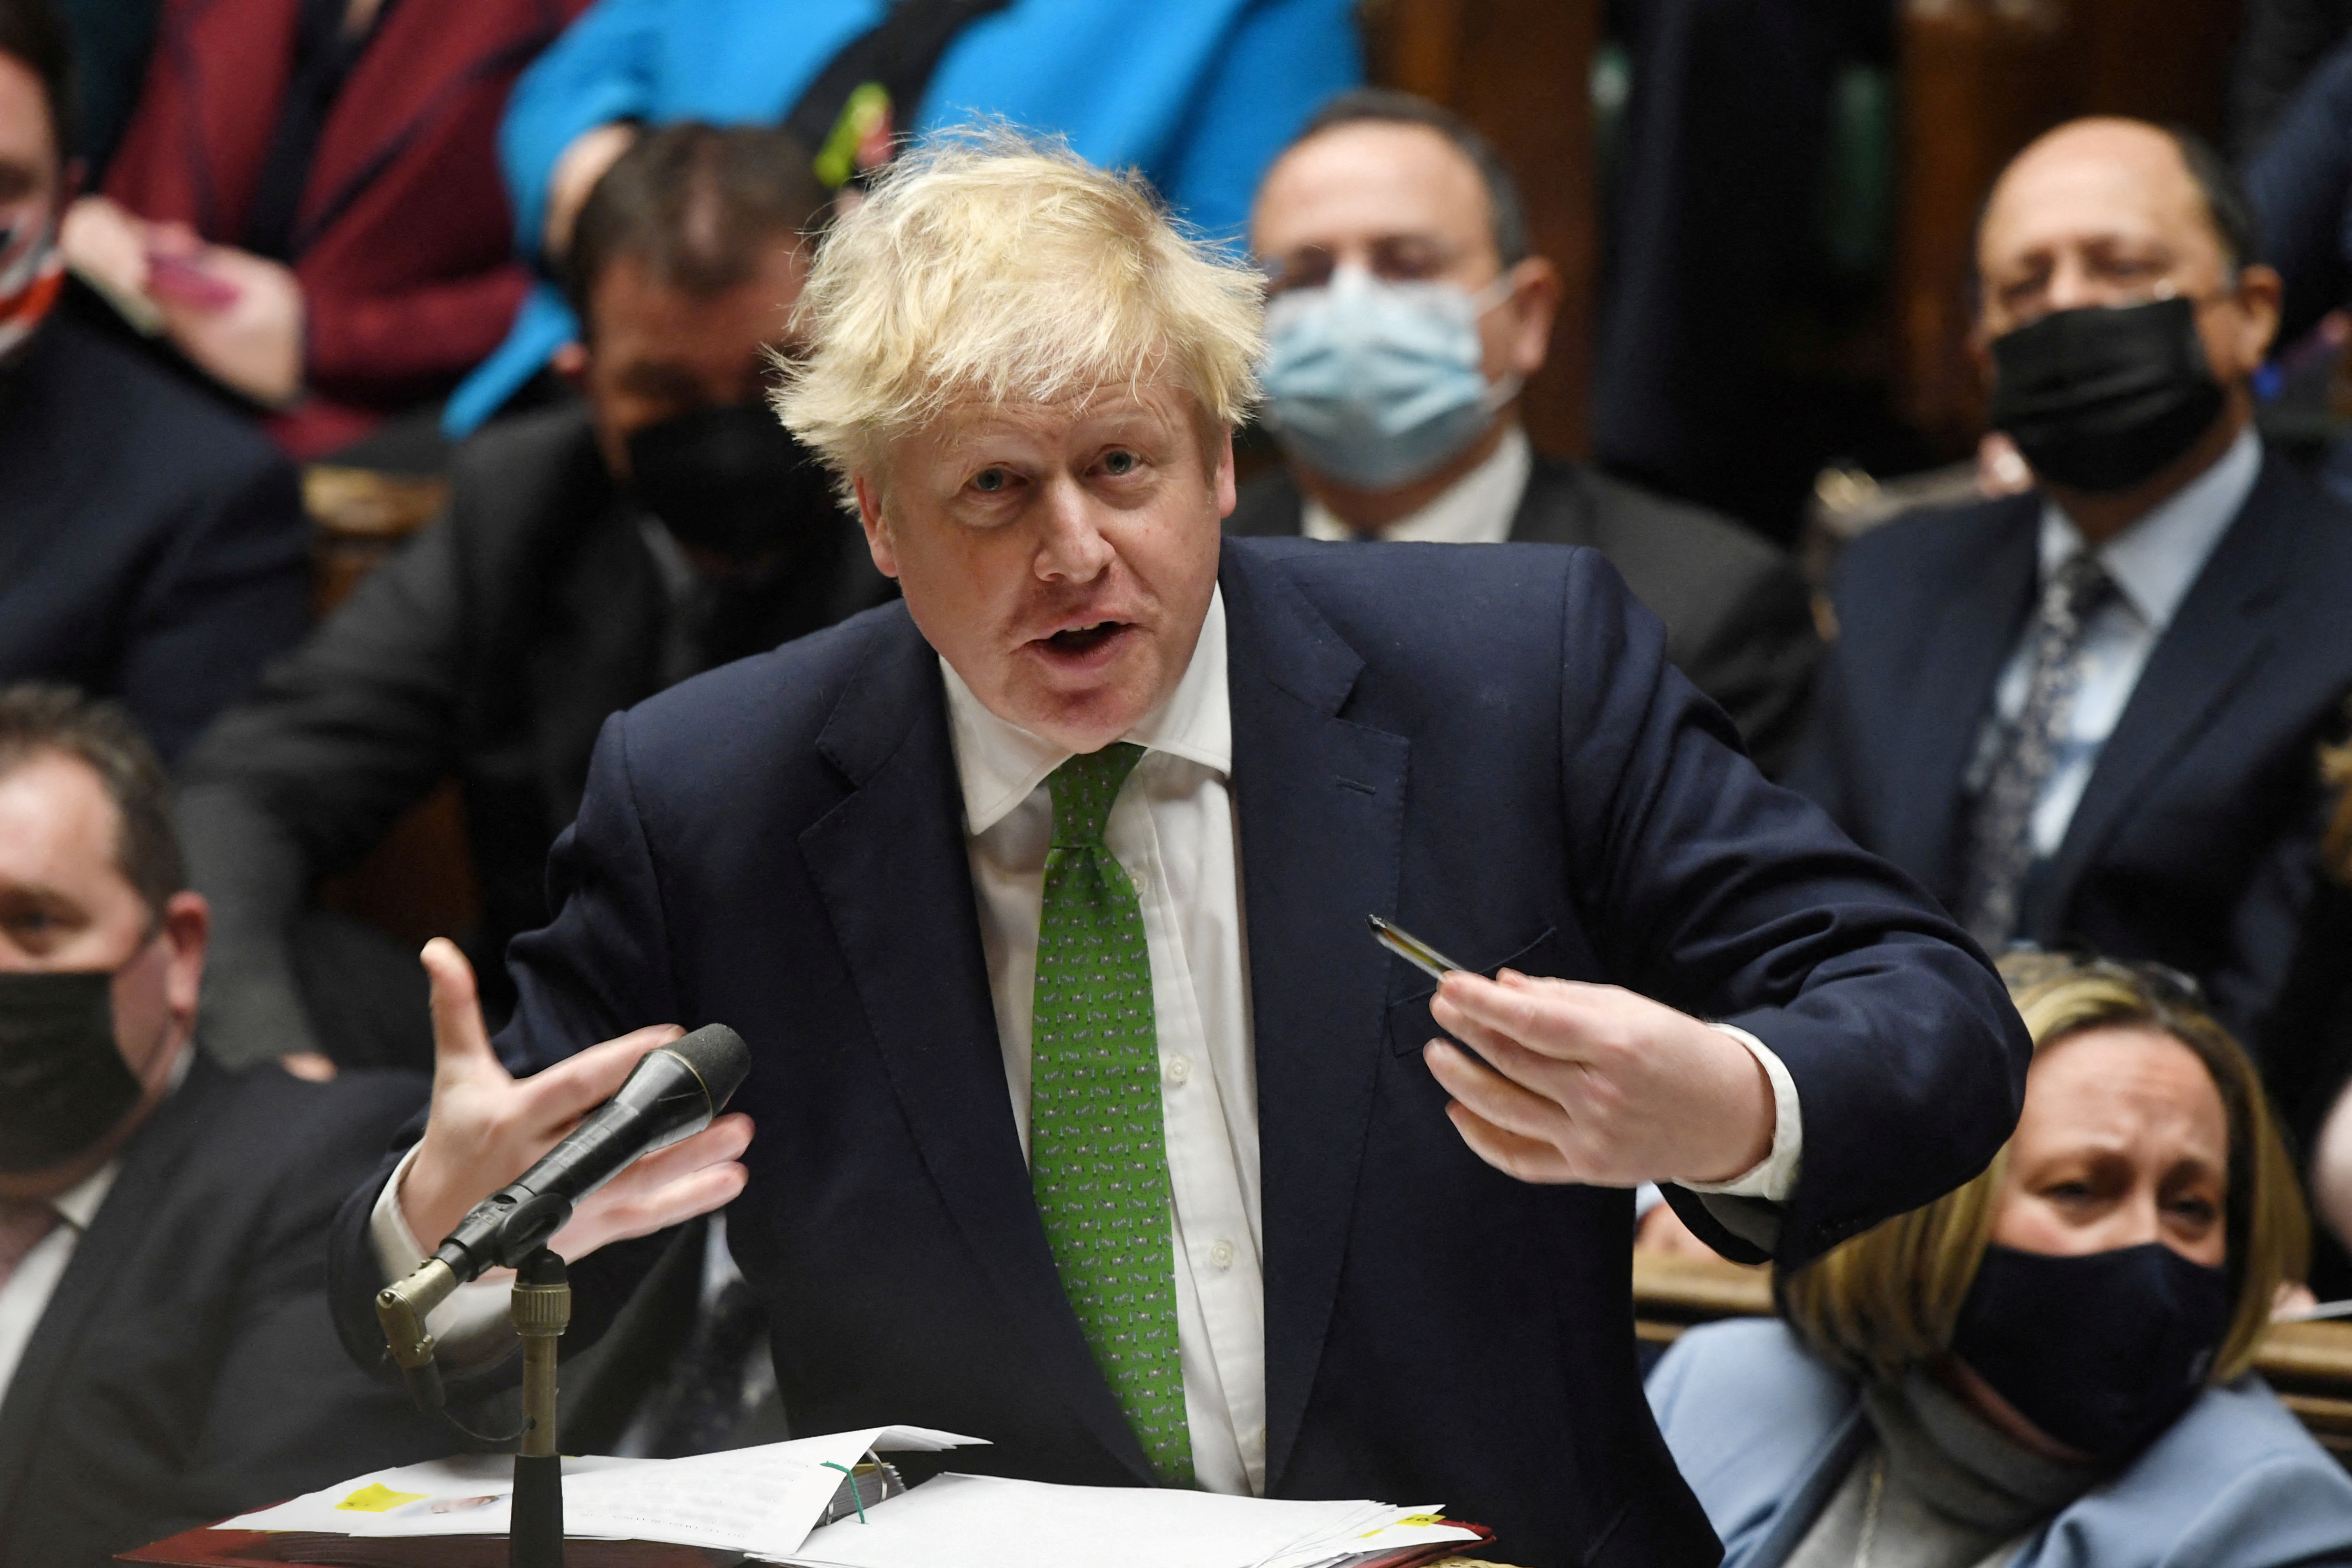 British Prime Minister Boris Johnson speaks during the weekly question time debate at Parliament in London, Britain, January 19, 2022.